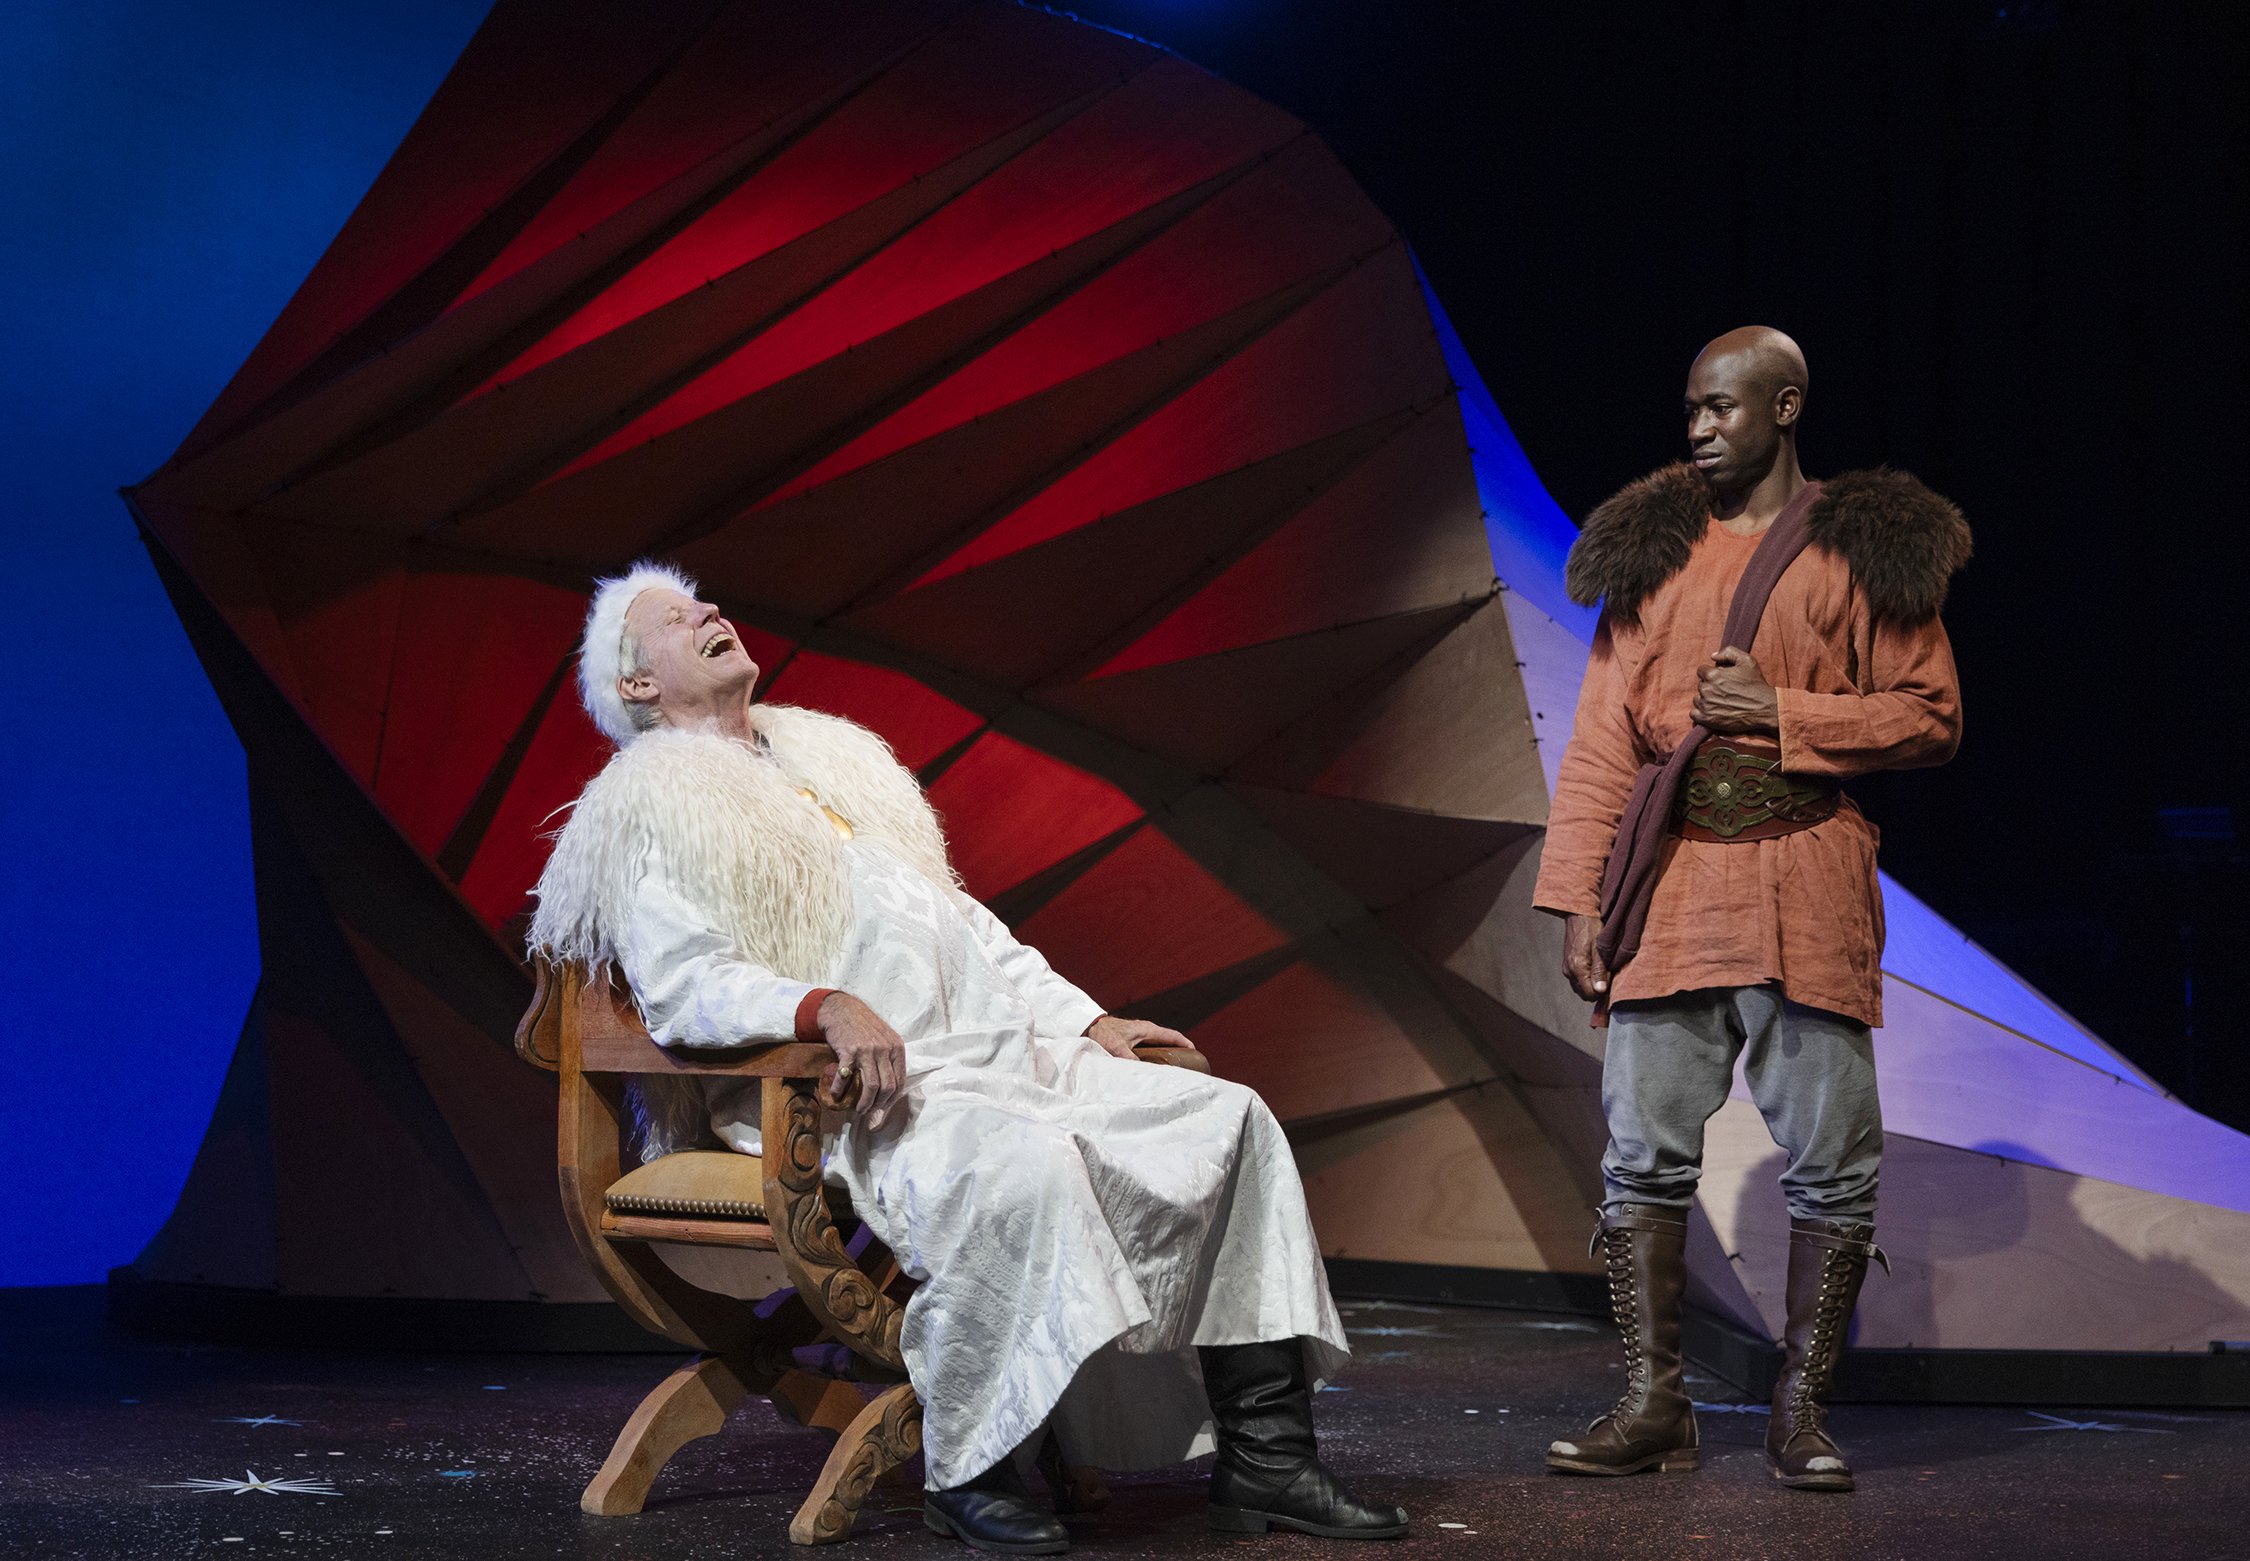 Joseph McGrath as King Argaven and Kevin Aoussou as Genly Ai. Photo courtesy of Tim Fuller.